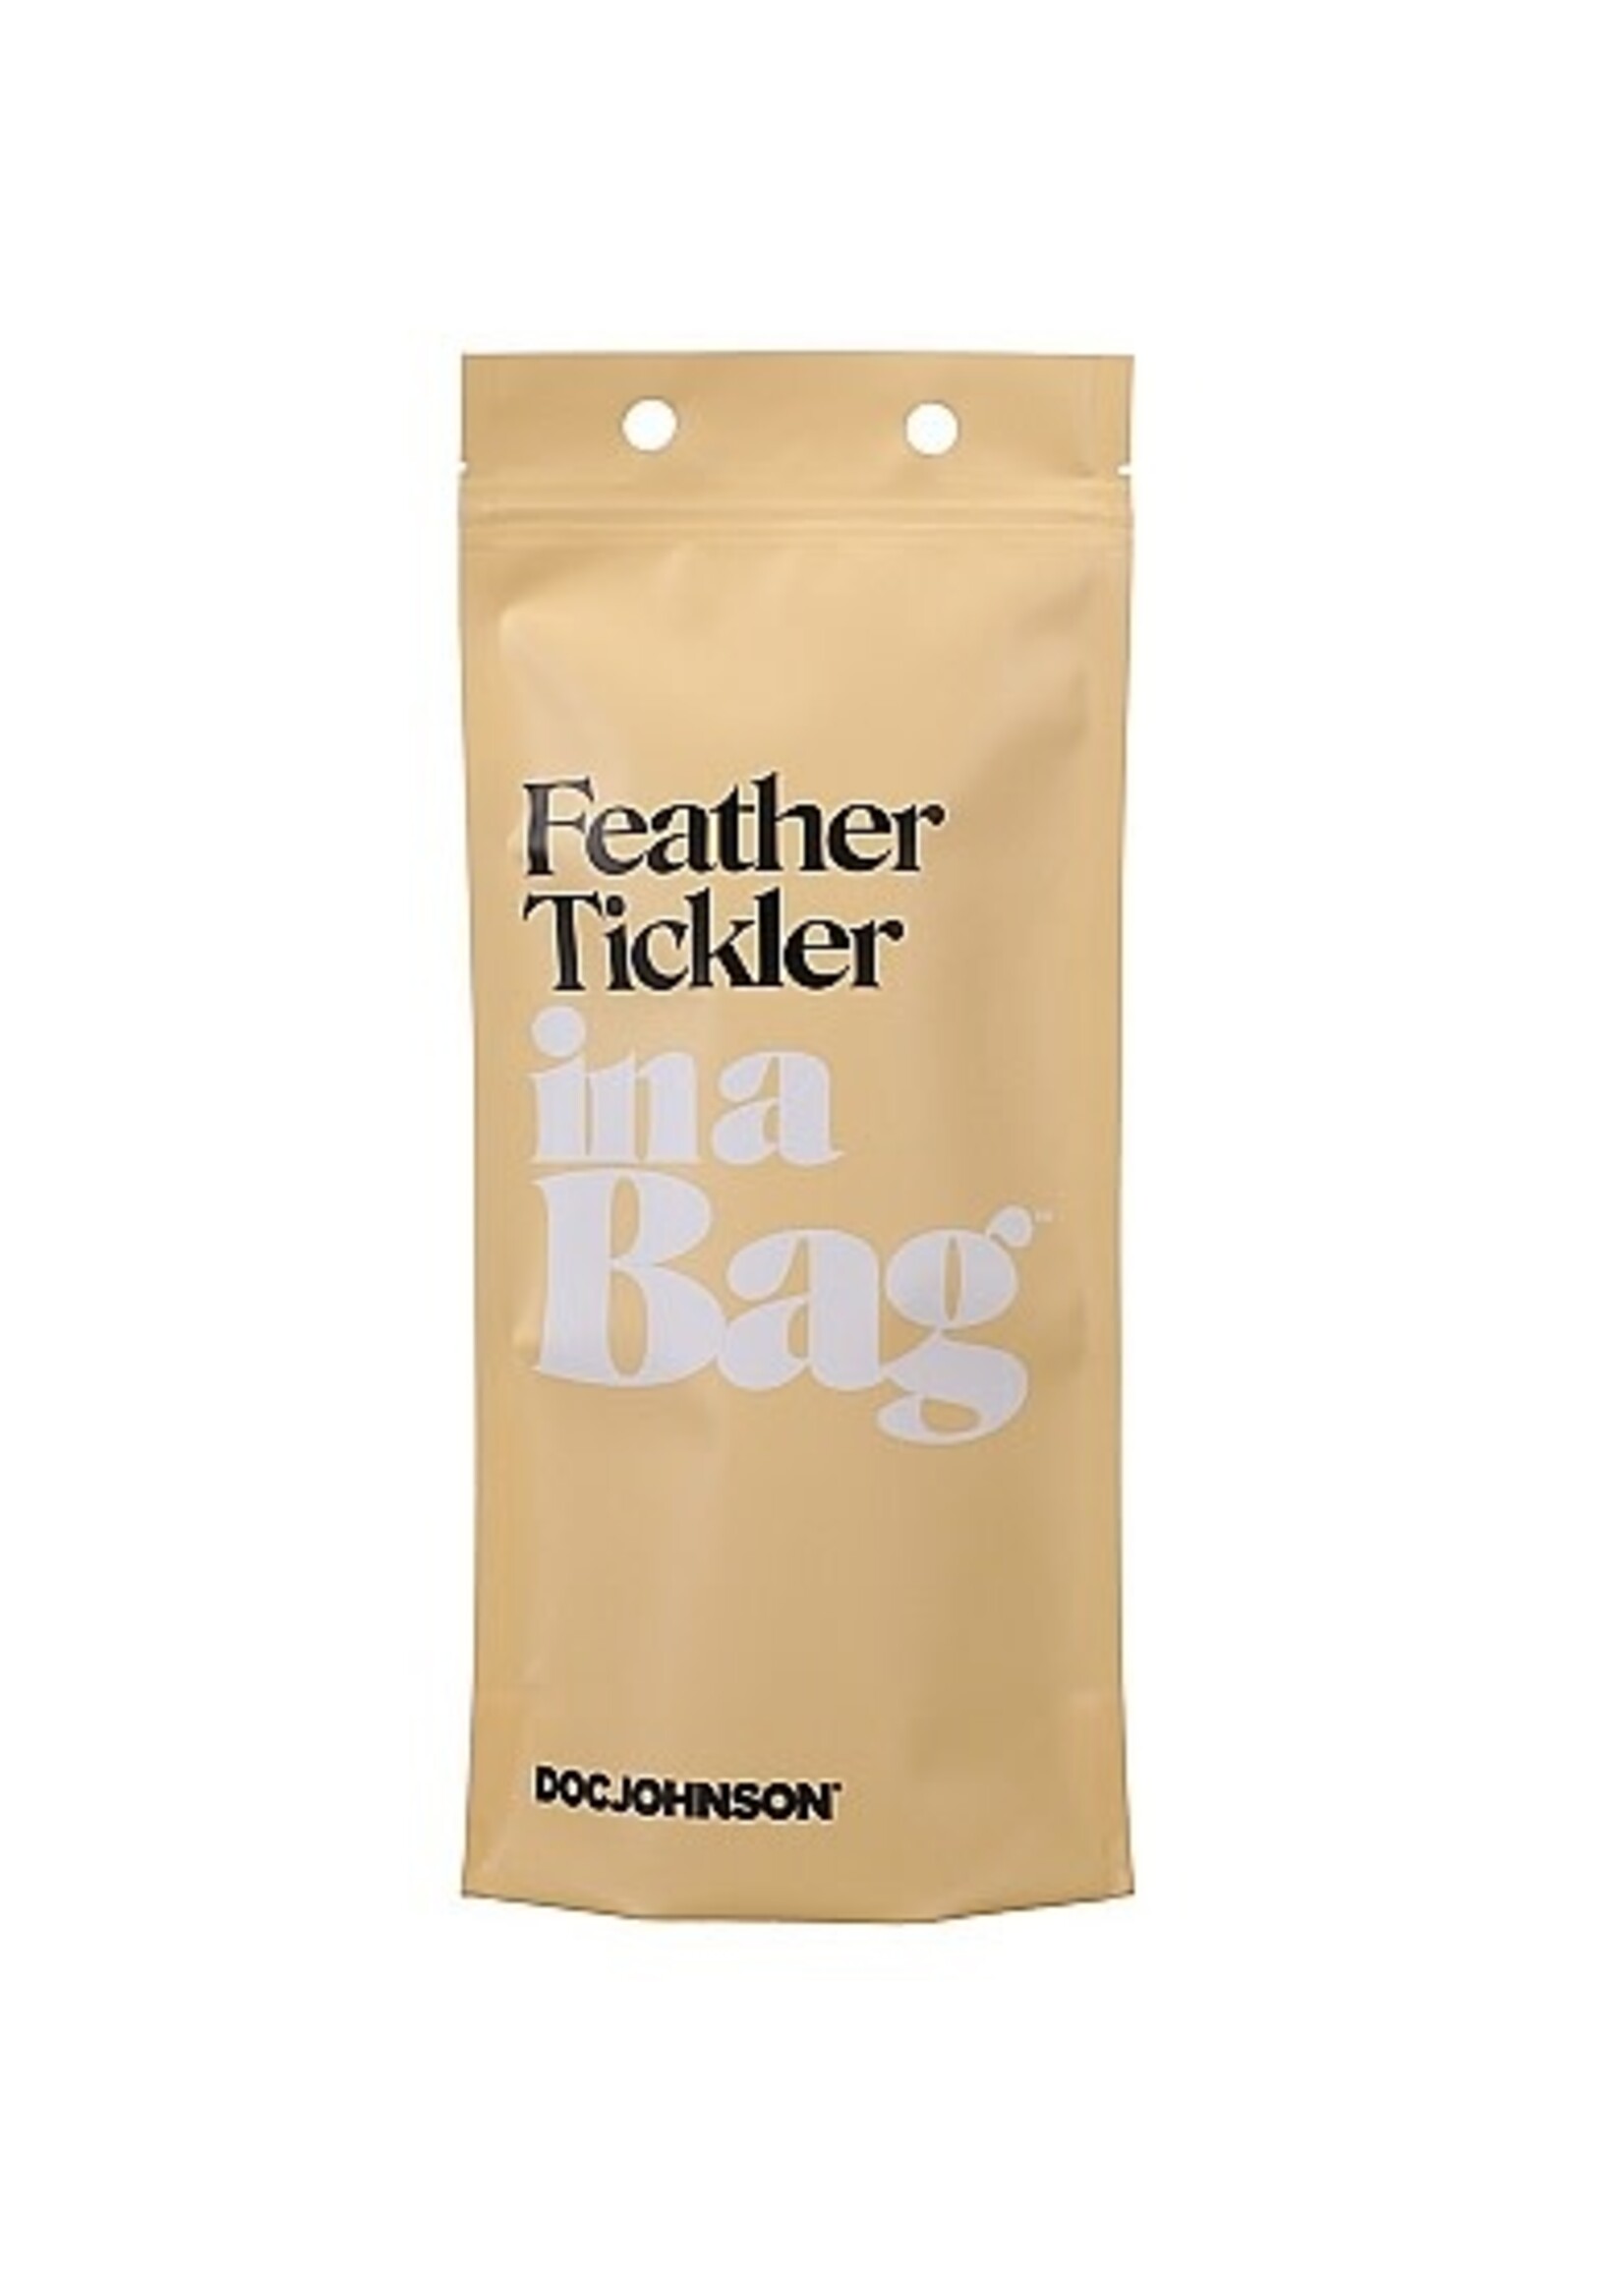 Doc Johnson Feather tickler in a bag